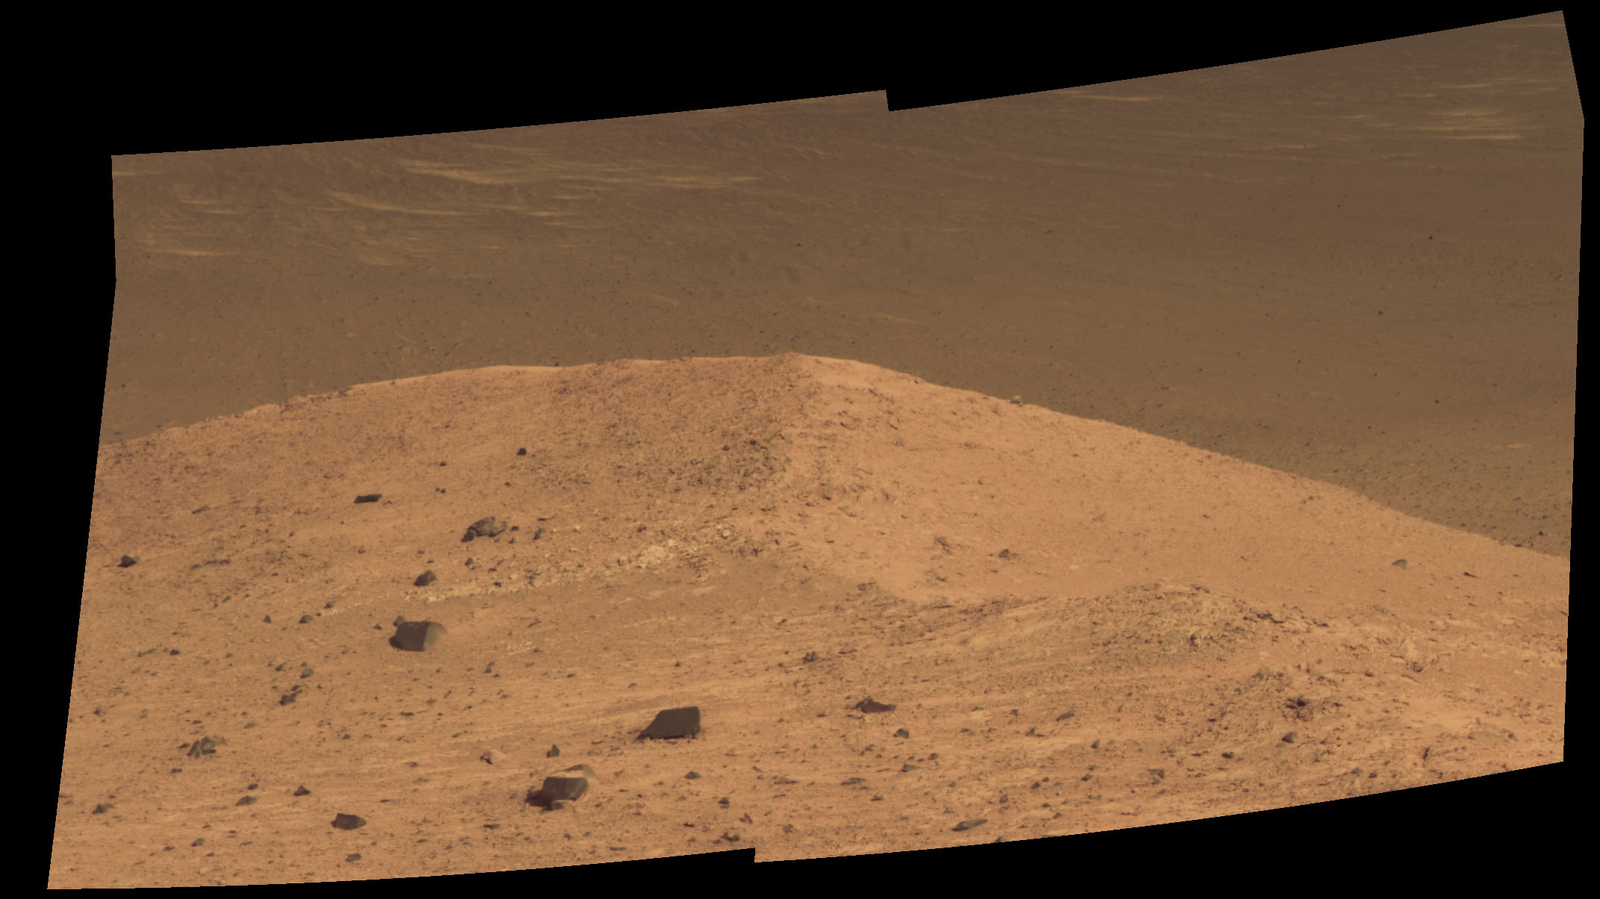 This Sept. 21, 2016, scene from the panoramic camera (Pancam) on NASA's Mars Exploration Rover Opportunity shows "Spirit Mound" overlooking the floor of Endeavour Crater. The mound stands near the eastern end of "Bitterroot Valley" on the western rim of the crater, and this view faces eastward.